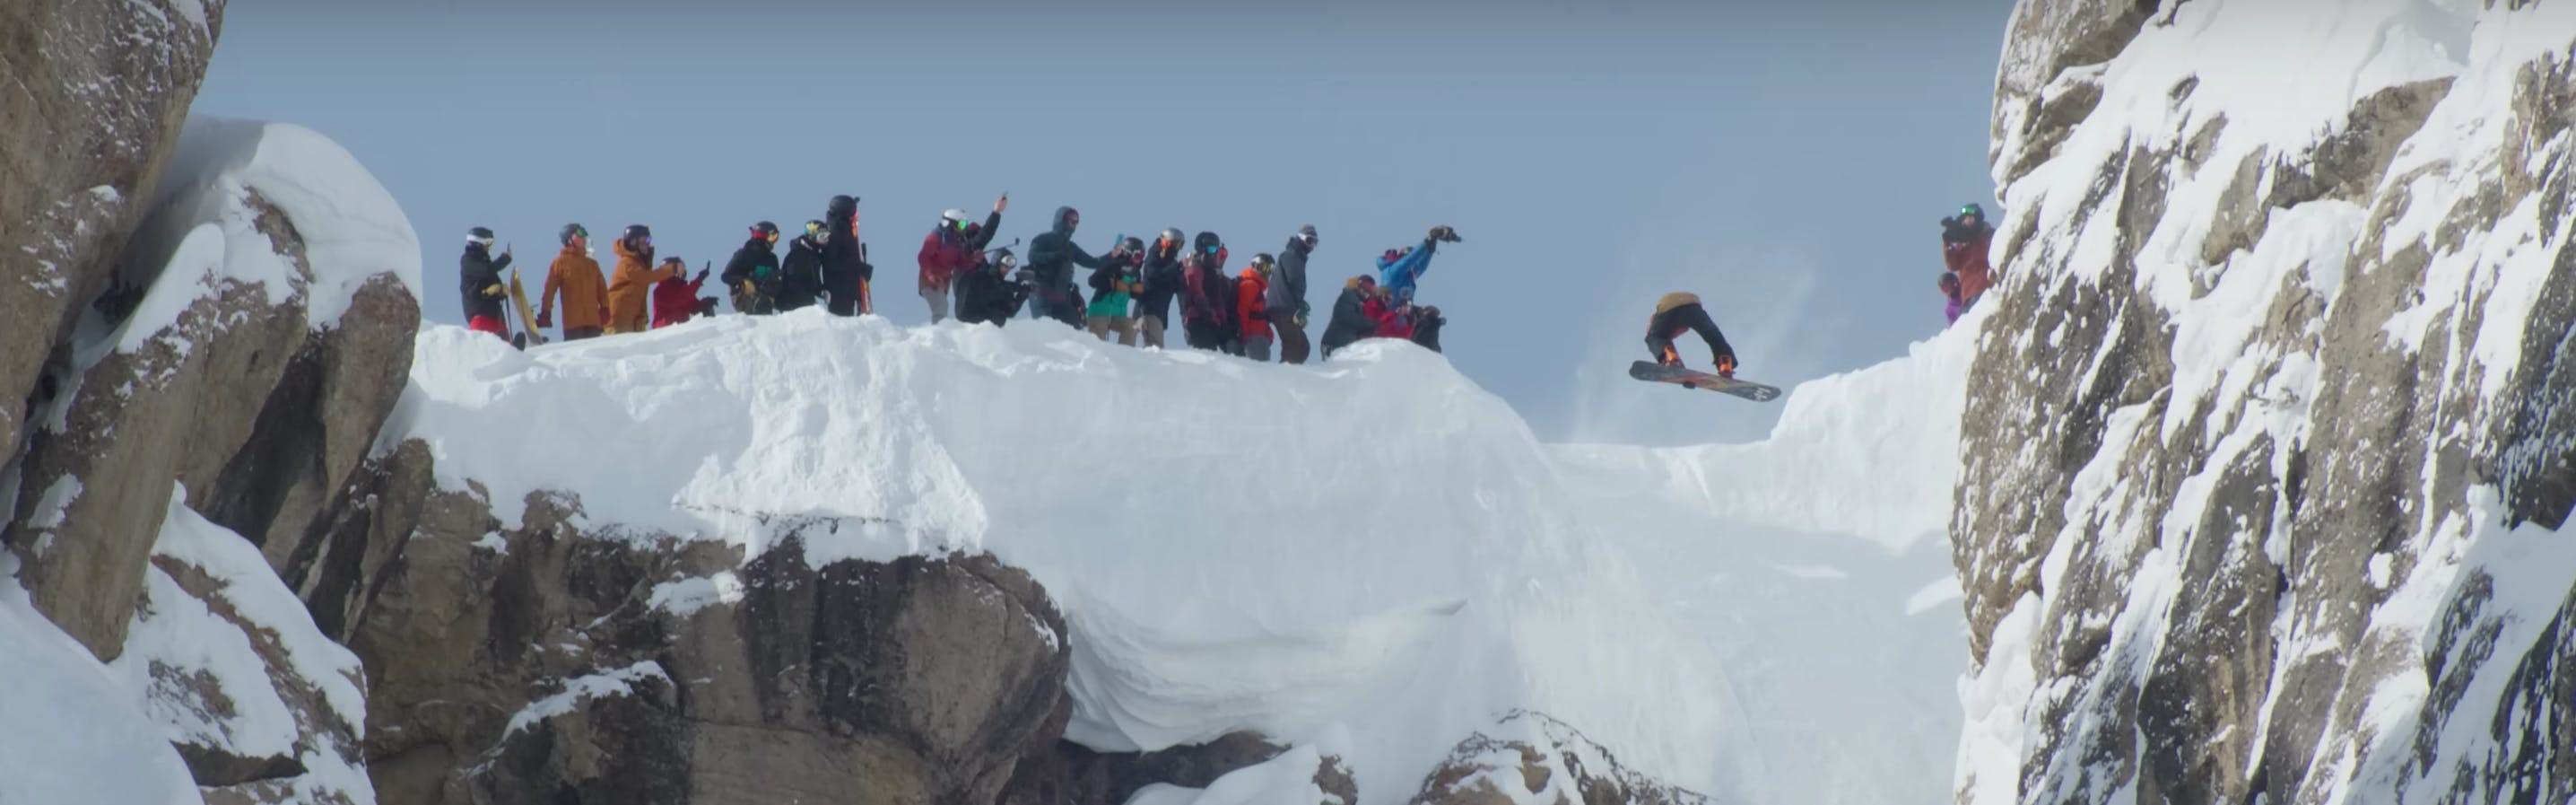 A snowboarder drops into Corbet's coulier for Kings and Queens of Corbet's. Photo comes from screenshot of Jackson Hole Mountain Resort's YouTube video "KINGS & QUEENS: MIND-BLOWING MOMENTS."